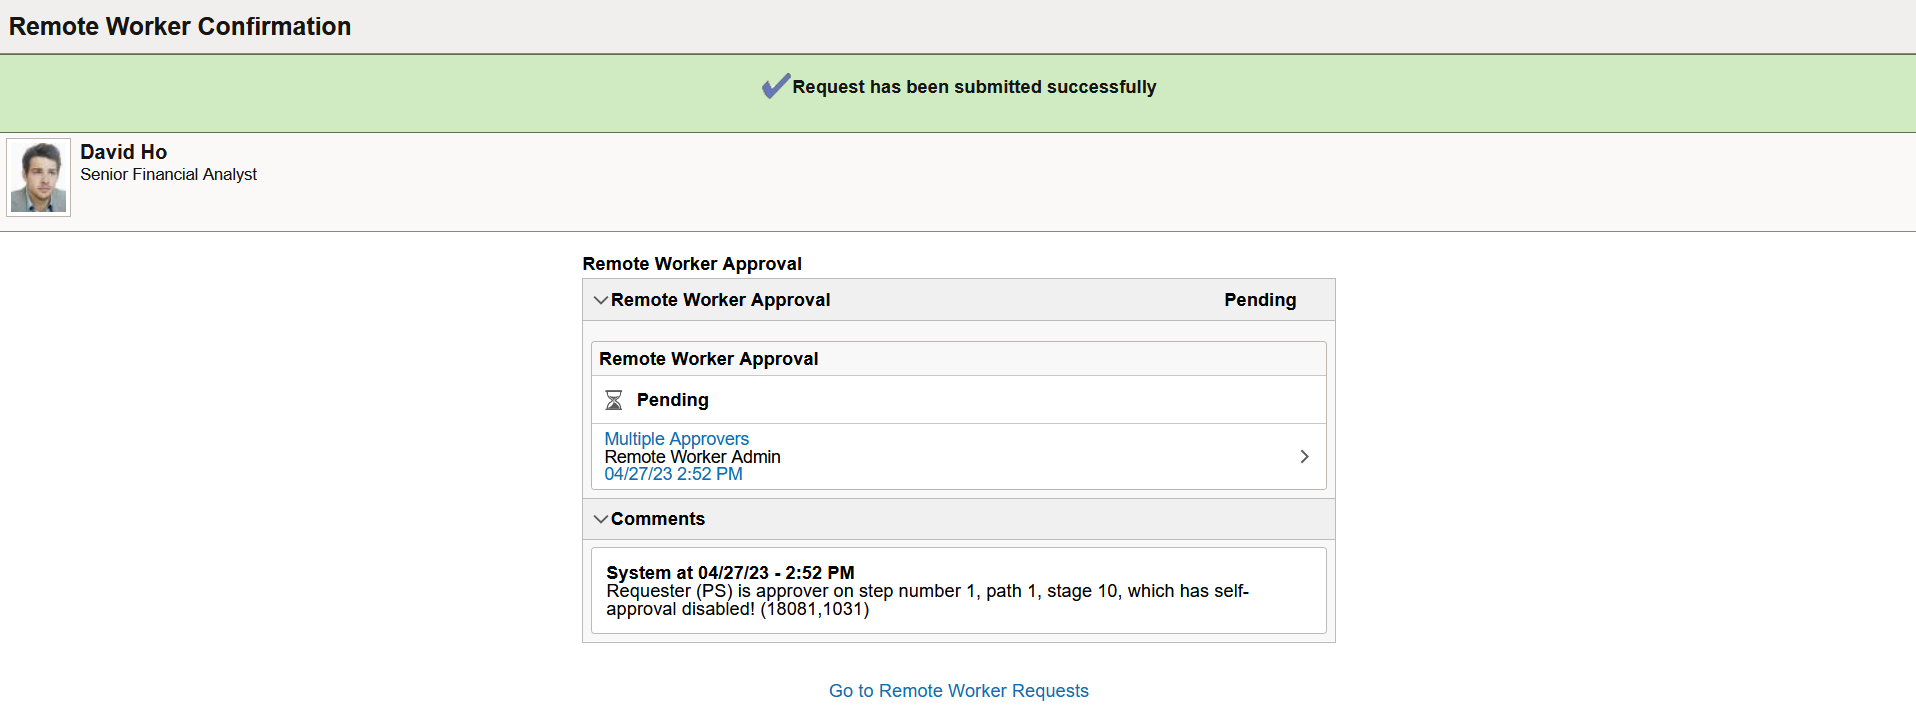 Remote Worker Confirmation page when approvals are required